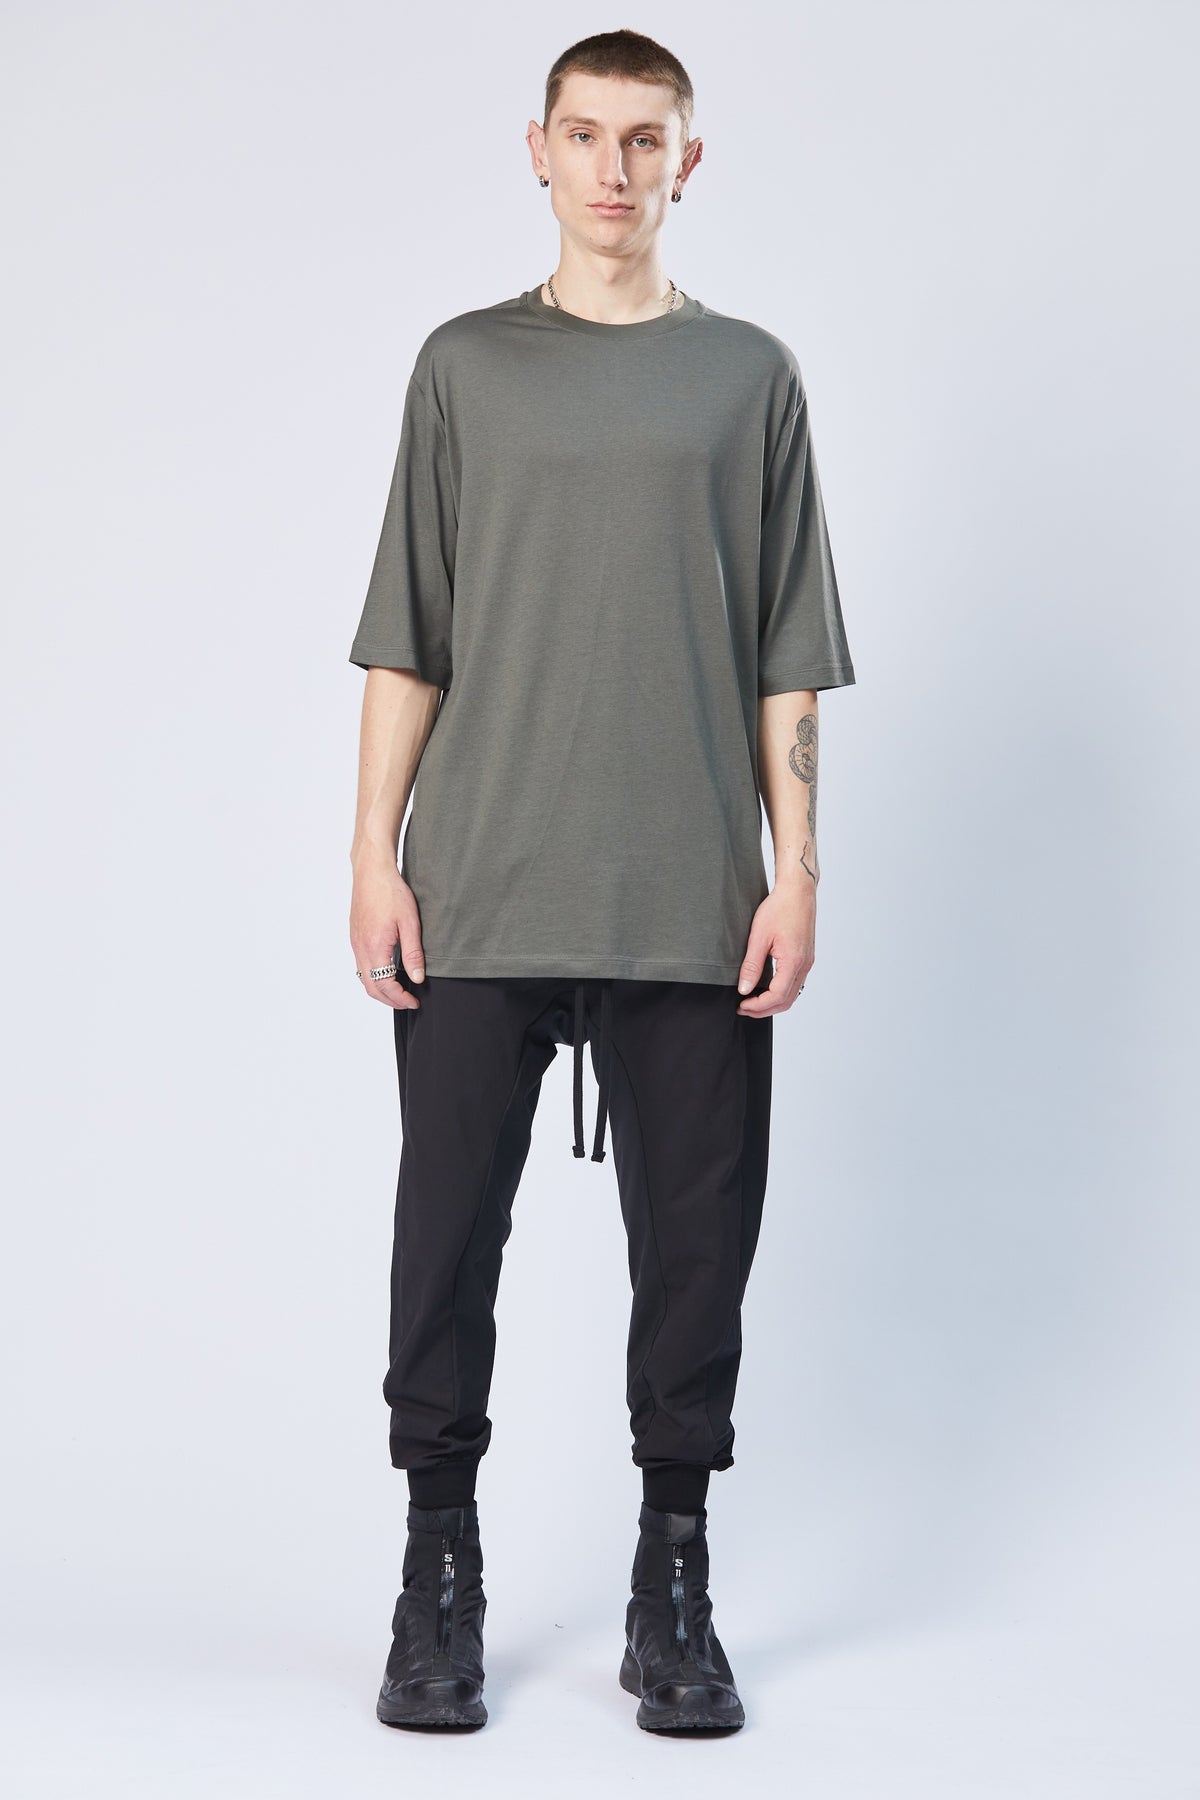 thom/krom  M TS 767 Relaxed Fit Tee - Green